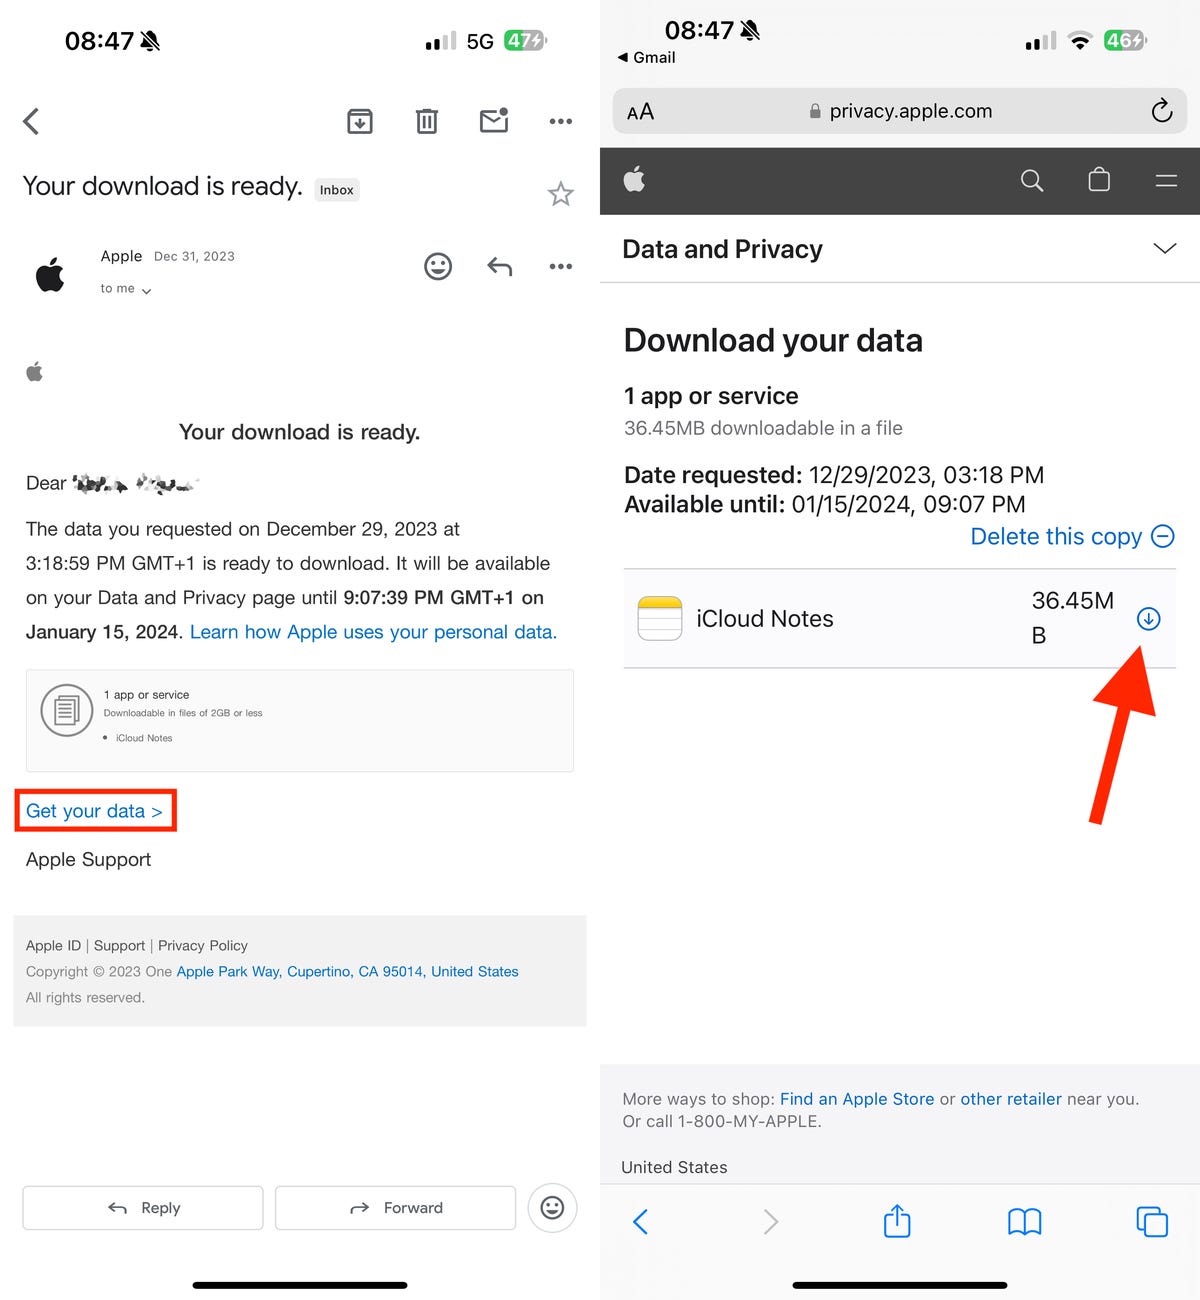 Email from Apple with your notes download link